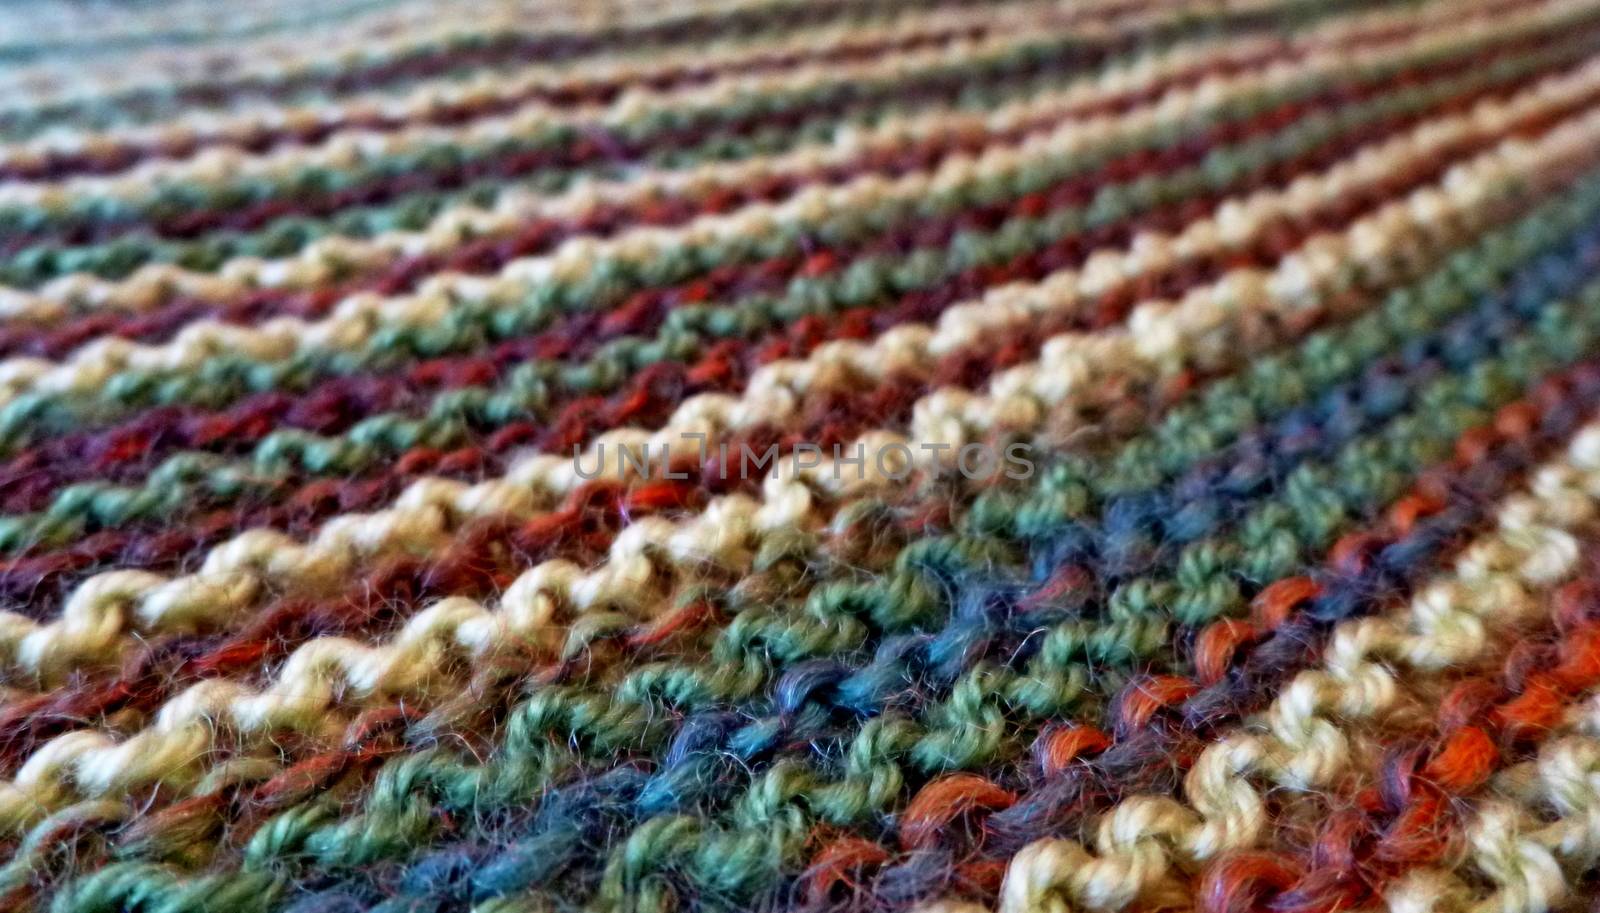 Knitting. Knitted multicolored fabric. Knitting texture. Background image. Hobbies leisure crafts. by Julia_Faranchuk